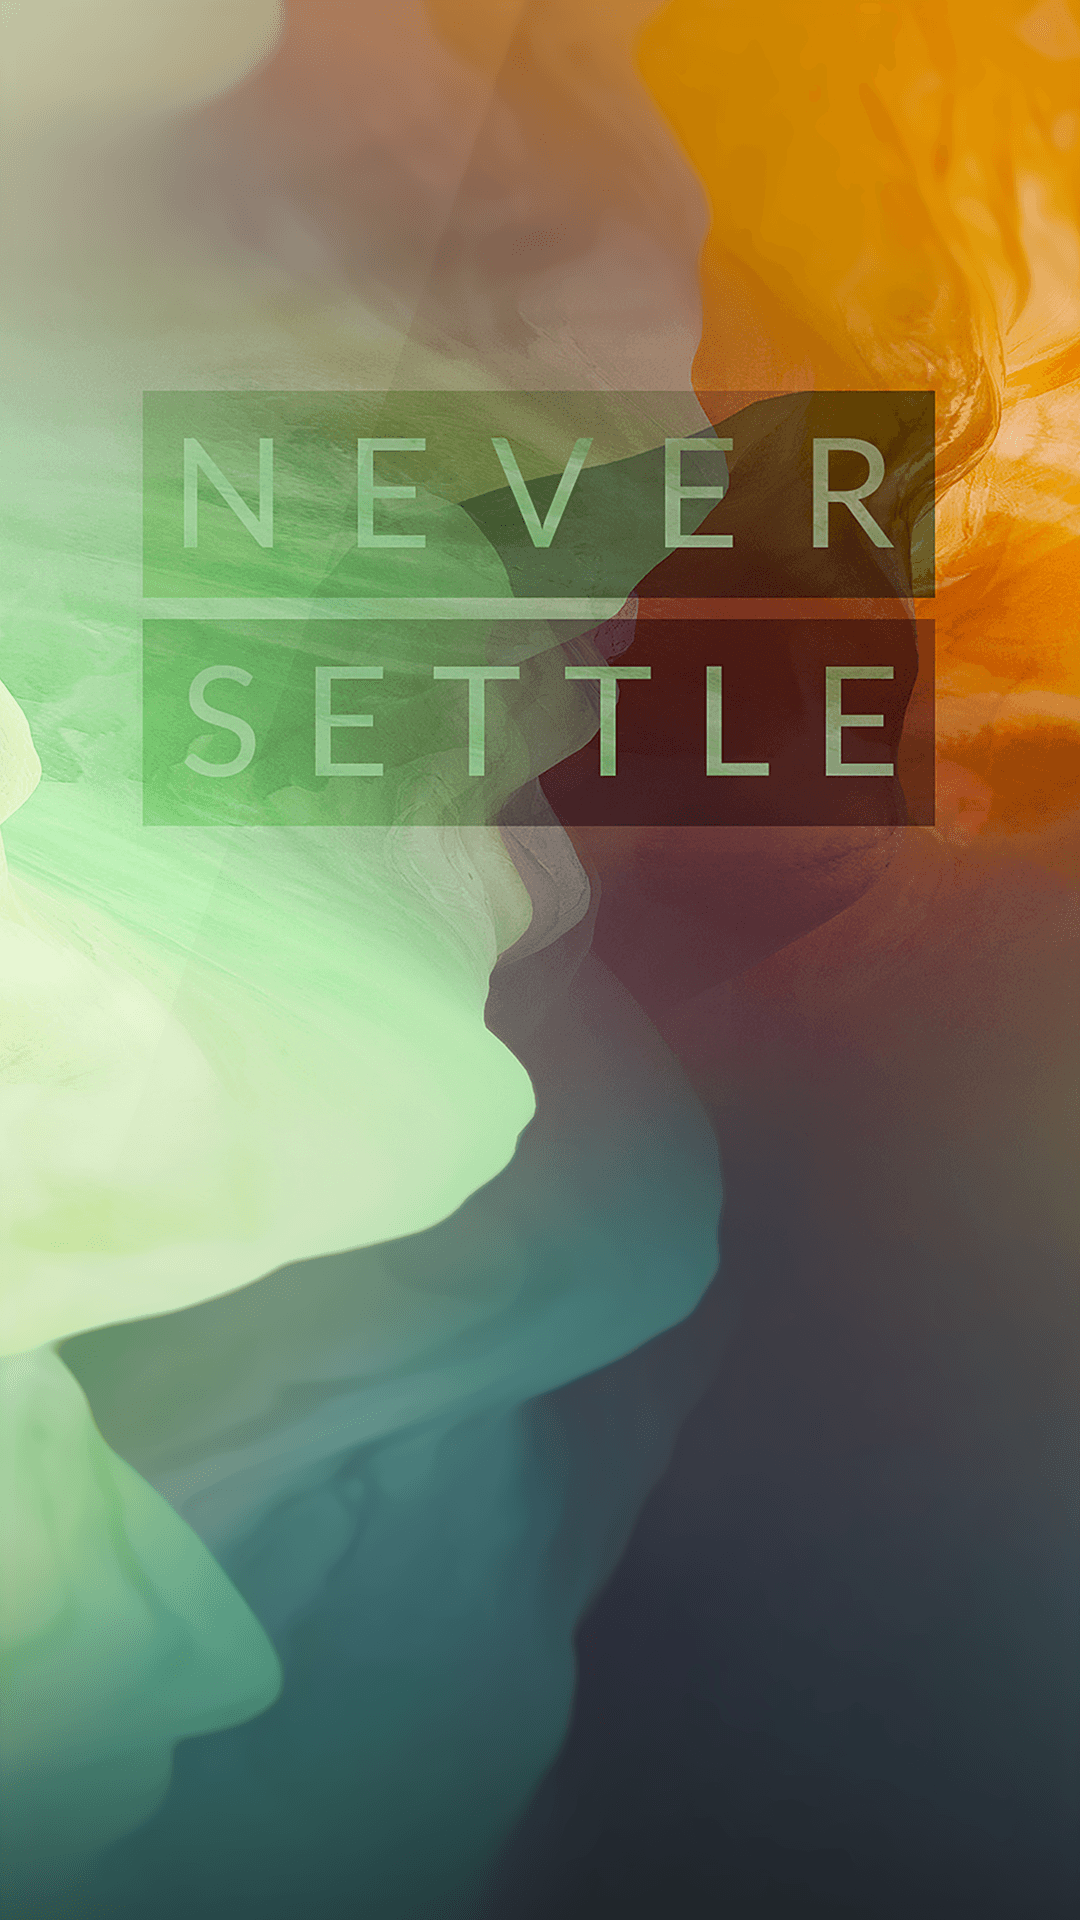 OnePlus two OS Wallpaper×1080. Never settle wallpaper, Tree wallpaper iphone, Oneplus wallpaper